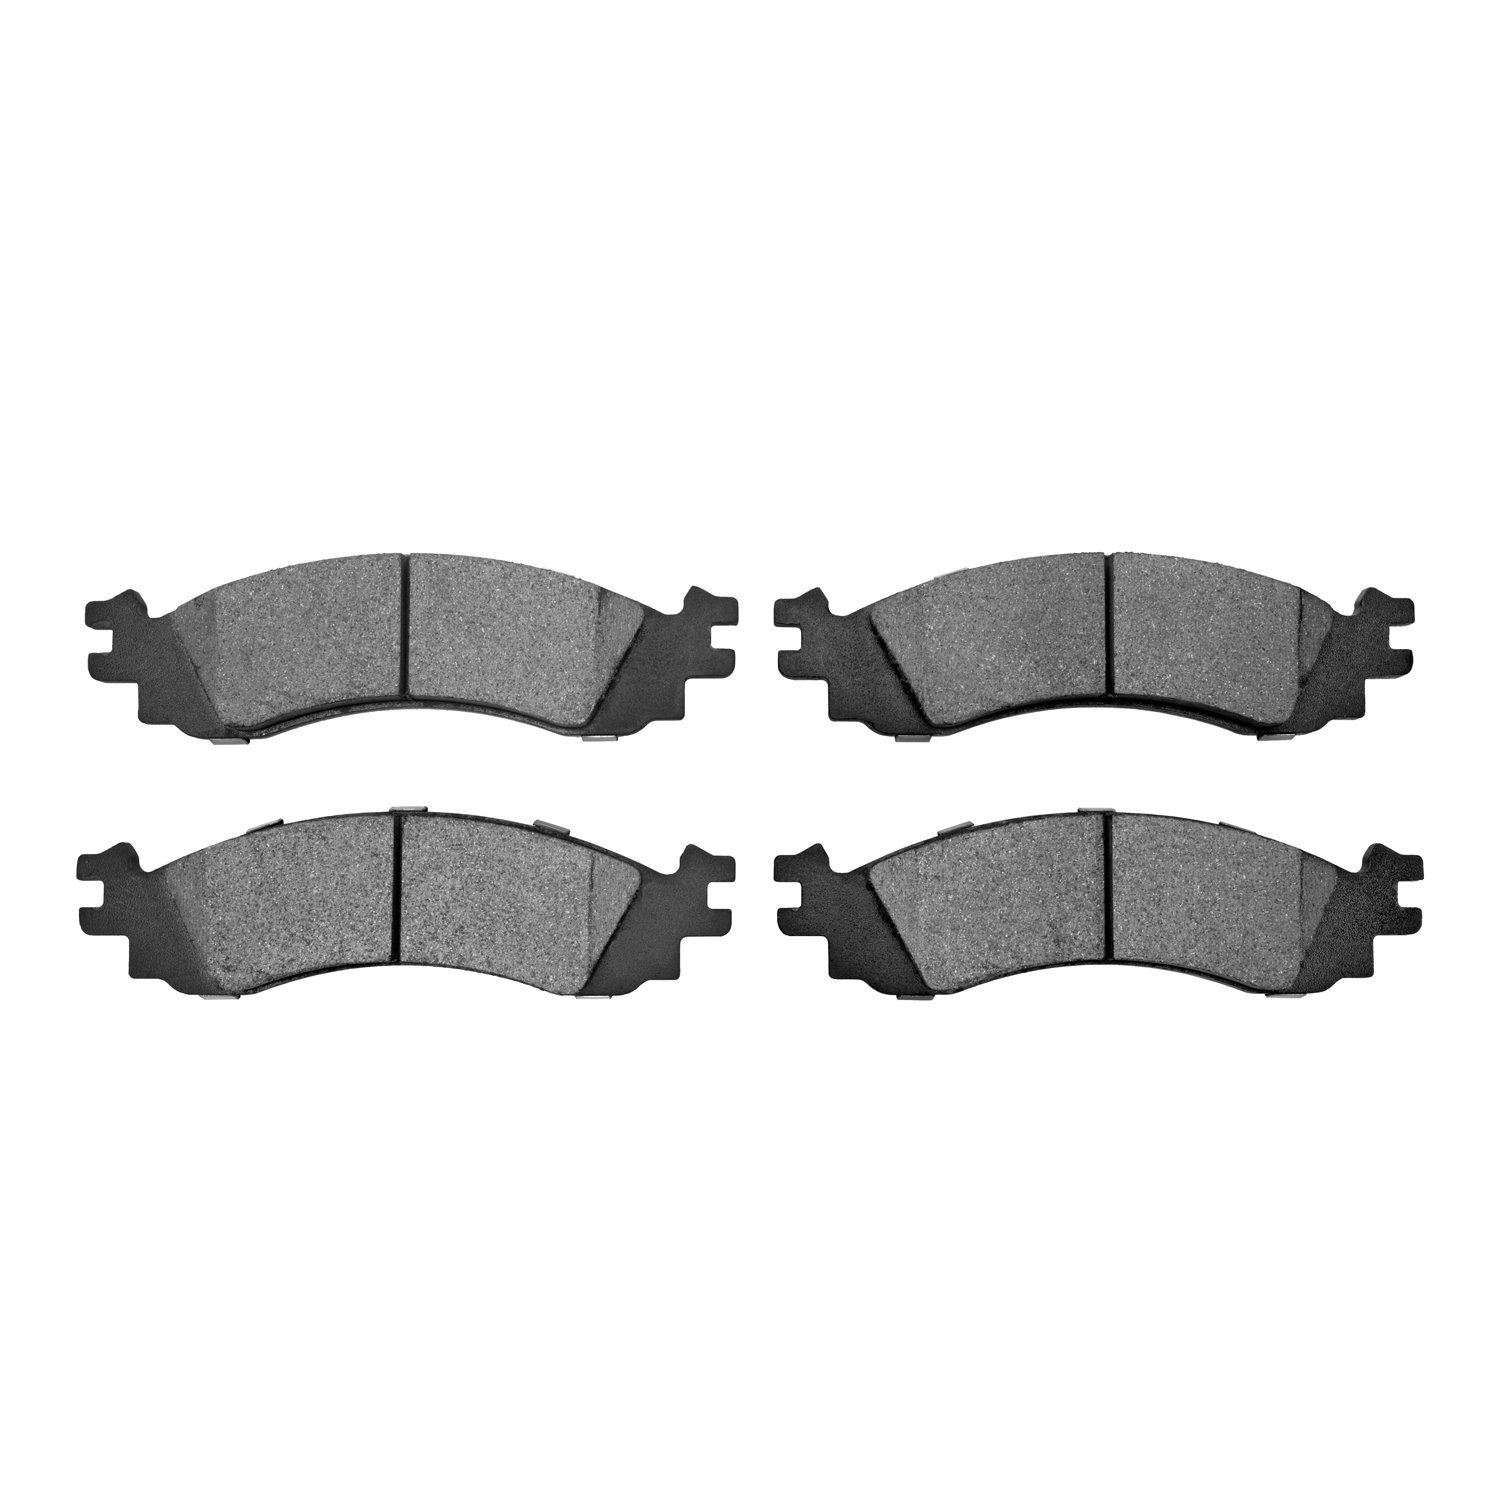 1552-1158-00 5000 Advanced Low-Metallic Brake Pads, 2010-2012 Ford/Lincoln/Mercury/Mazda, Position: Front